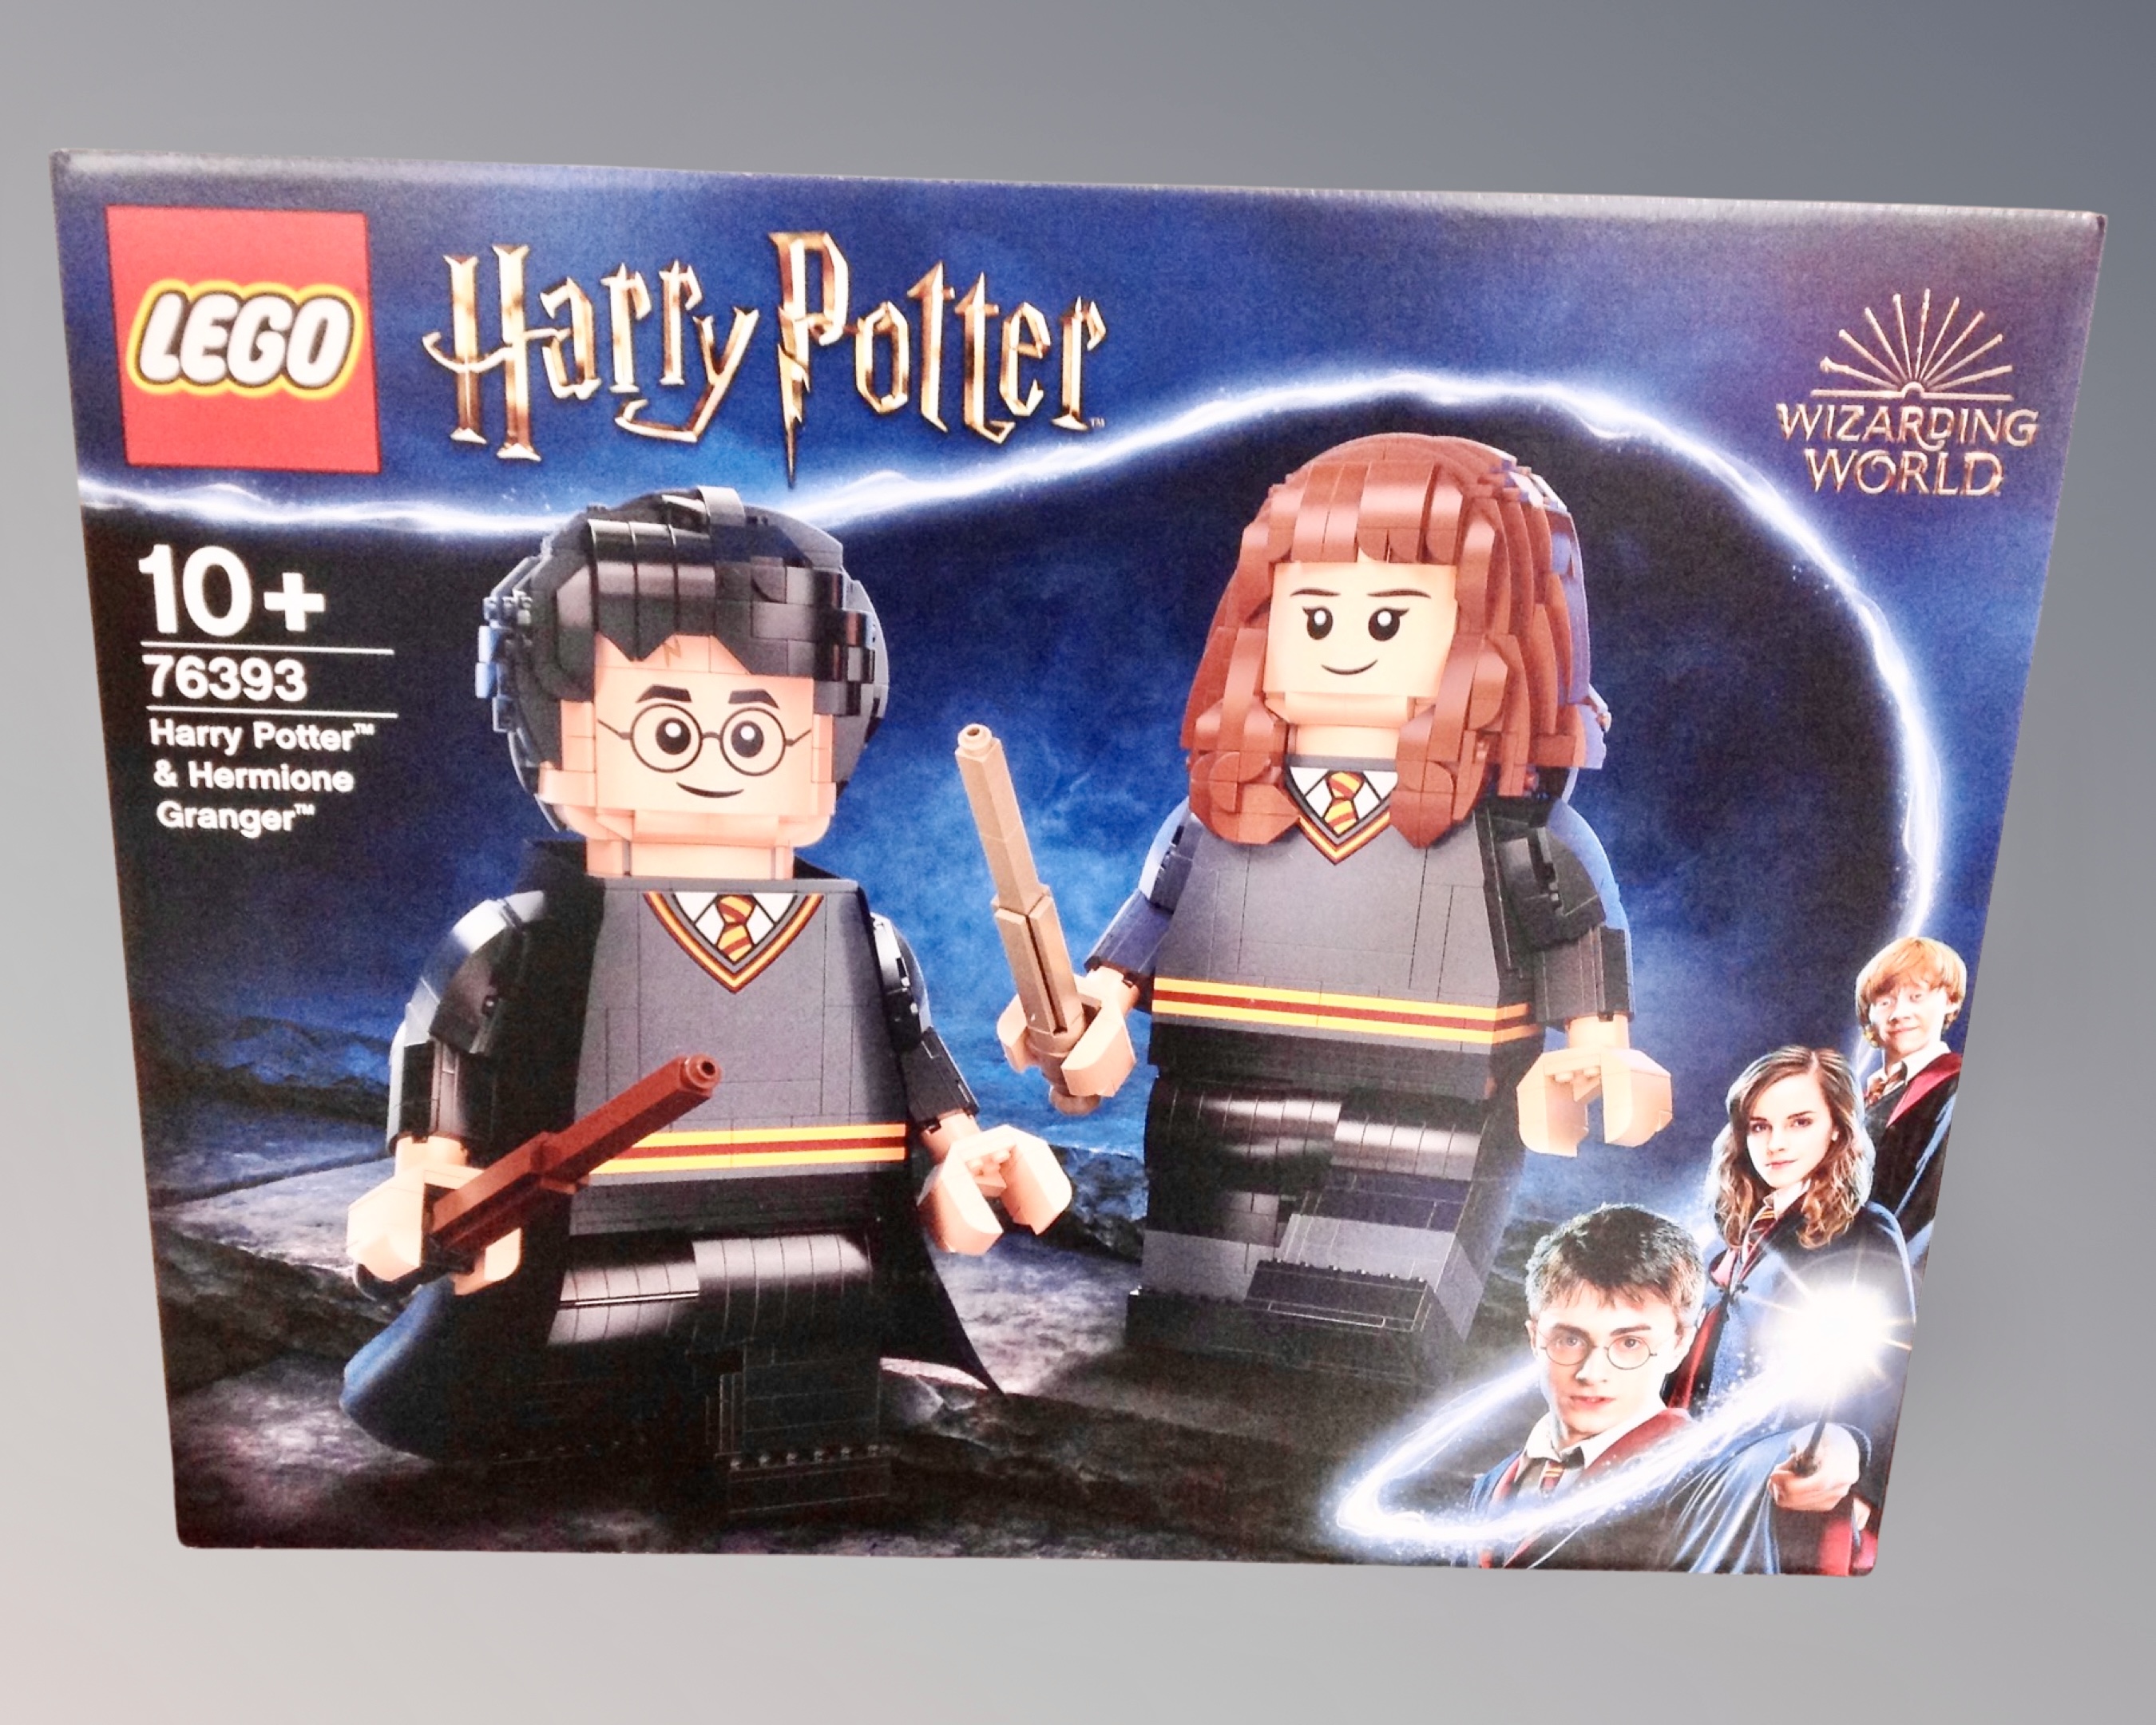 Lego : 76393 Harry Potter & Hermione Grainger, boxed, sealed, as new.